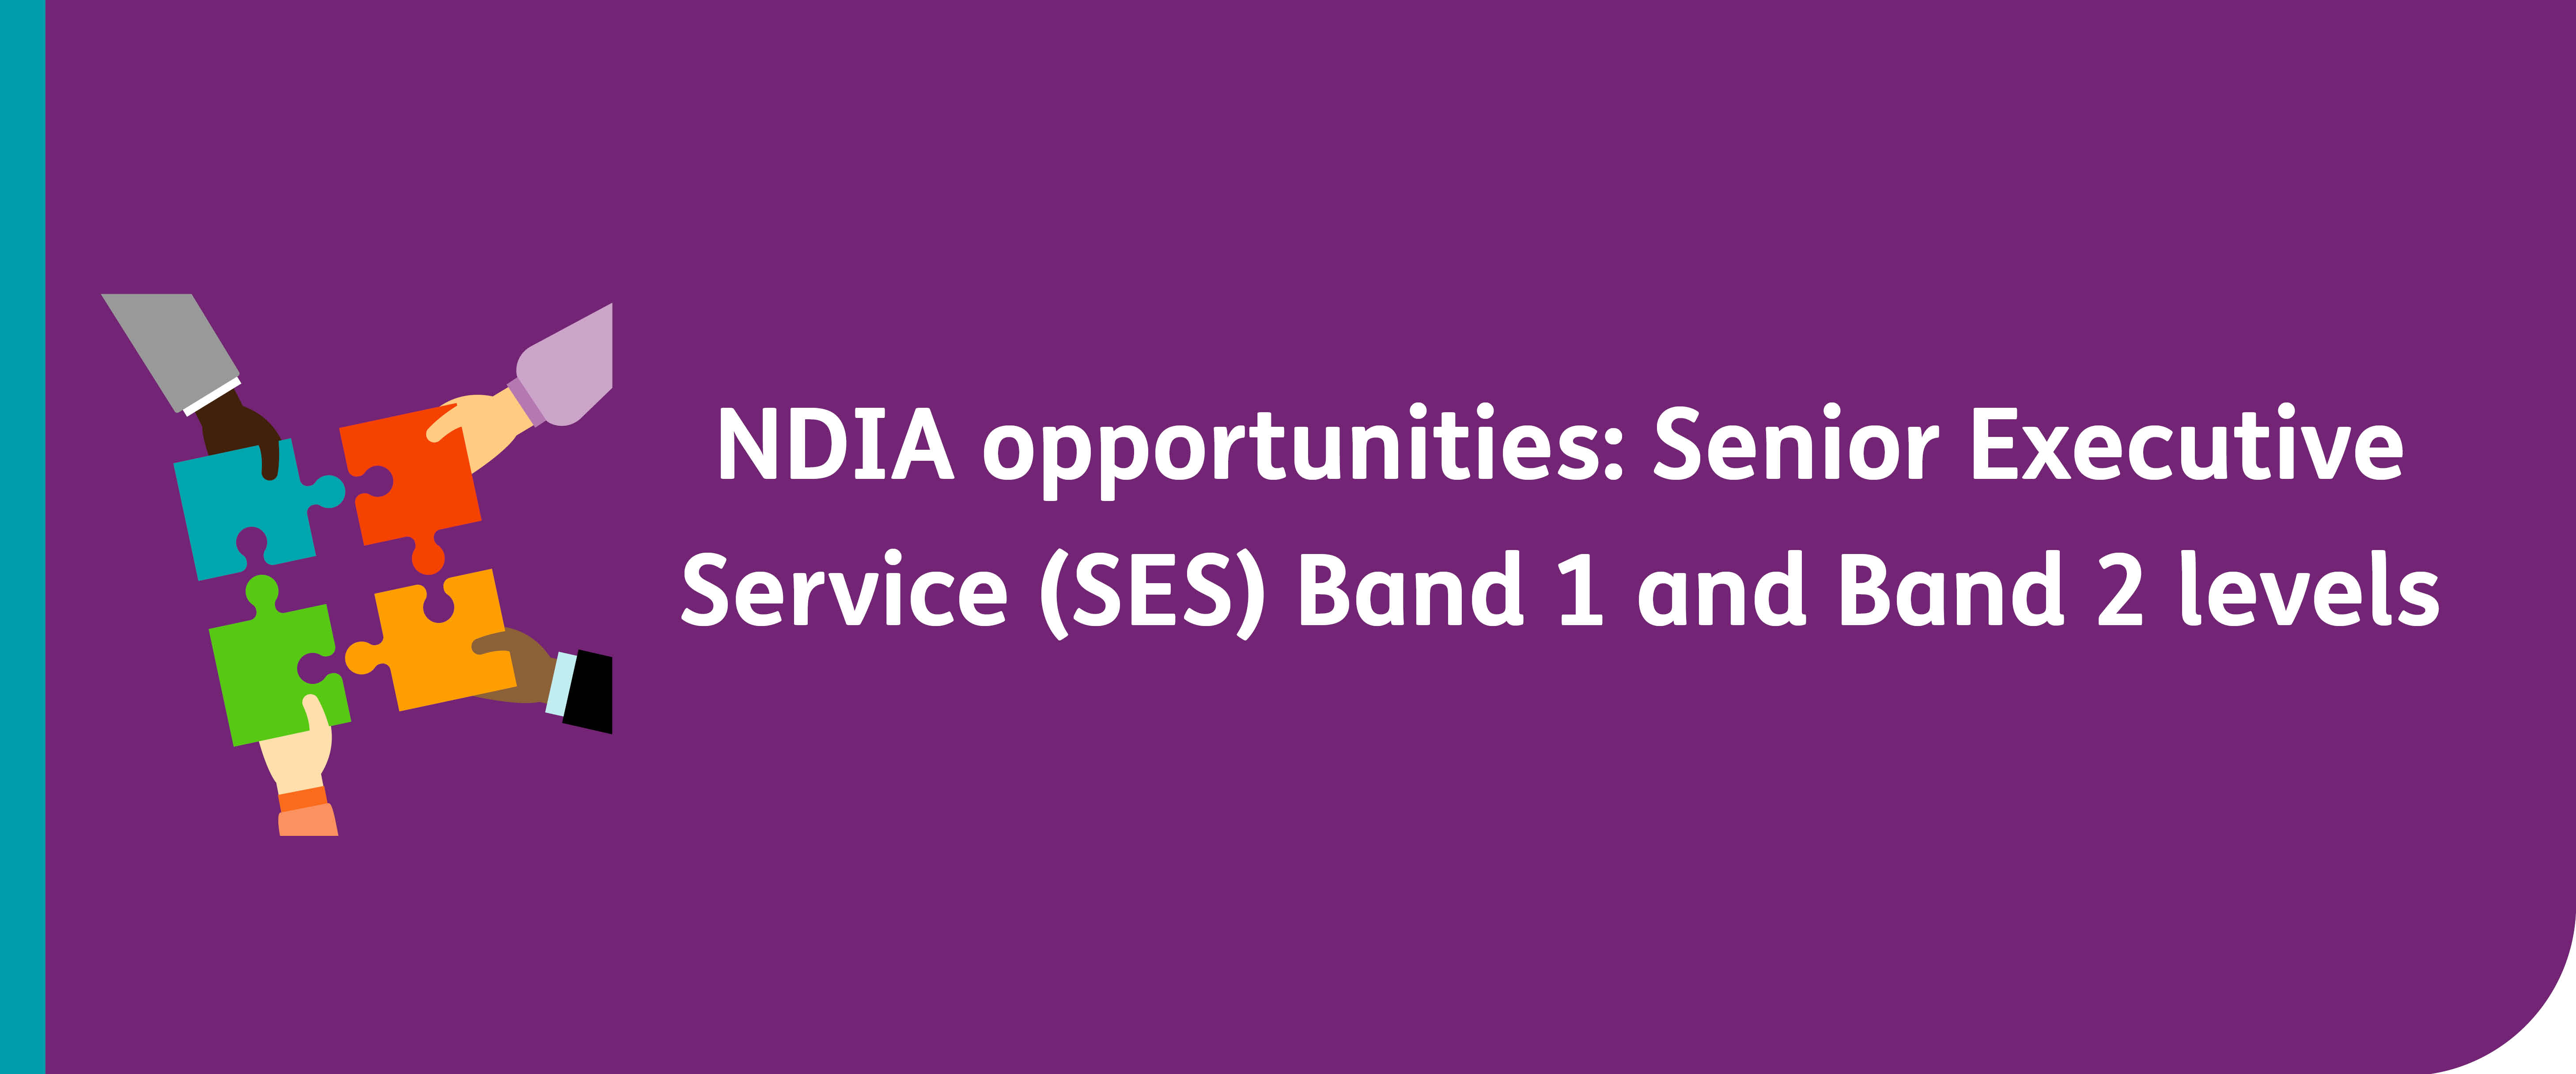 NDIA opportunities: Senior Executive Service (SES) Band 1 and Band 2 levels with a cartoon of 4 hands fitting puzzle pieces together